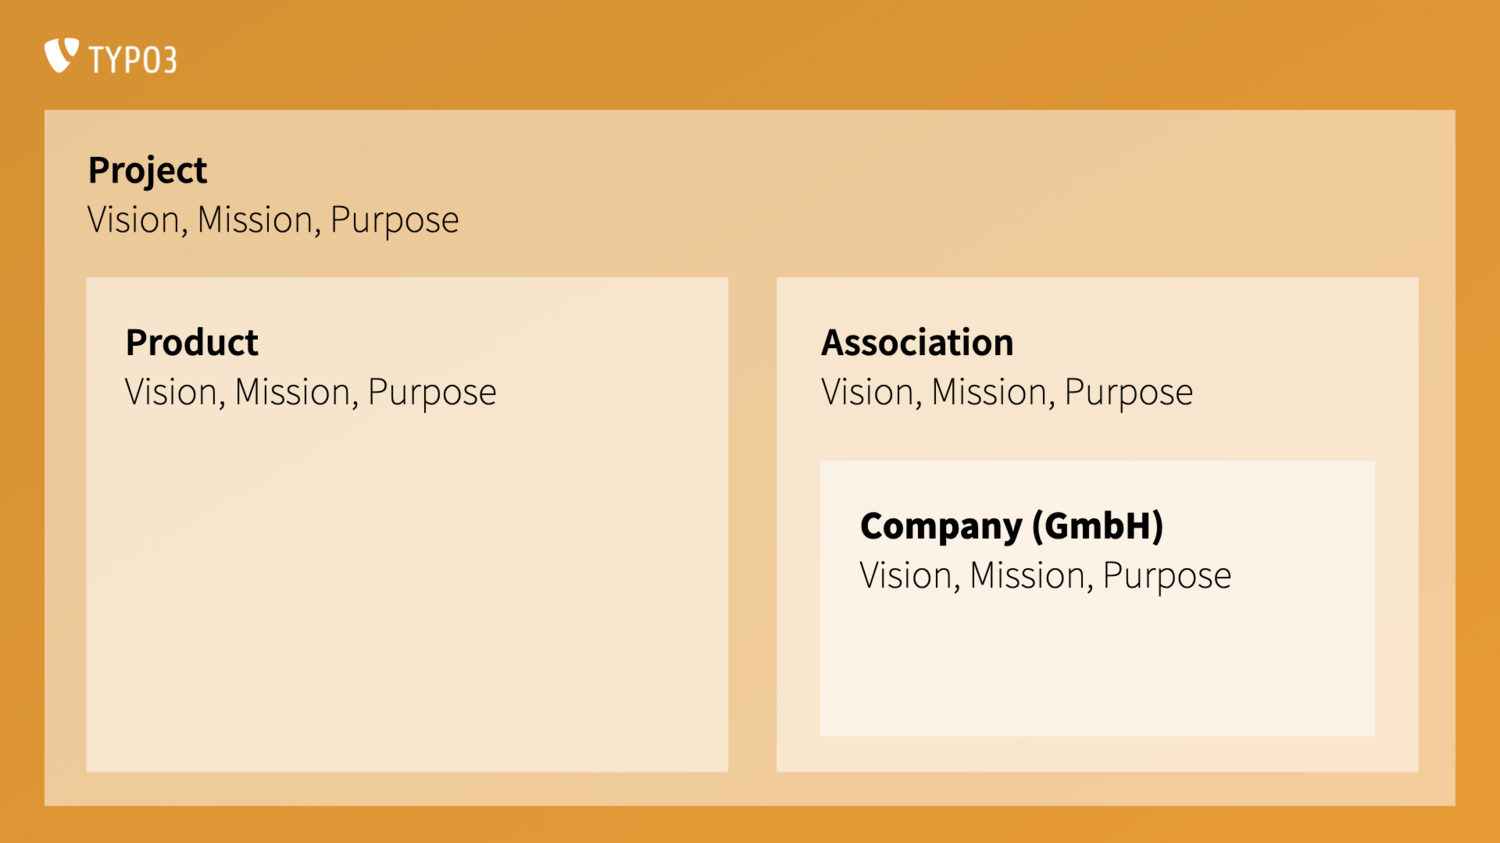 A diagram illustrating the vision, mission, purpose's inheritance as explained in the text.